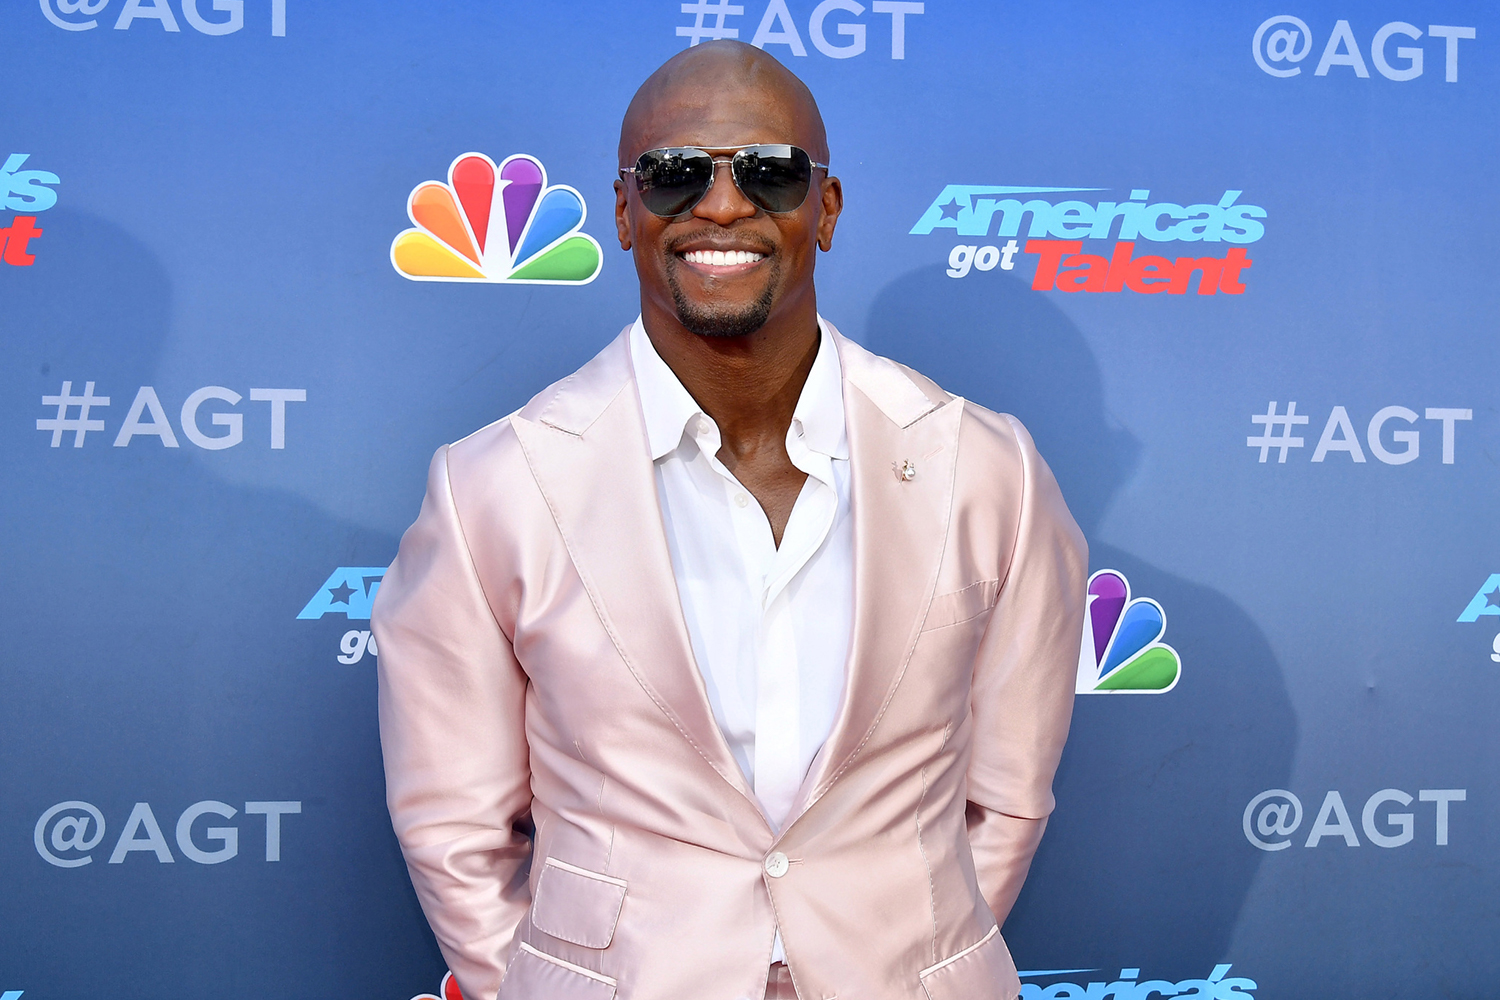 Terry Crews attends the "America's Got Talent" Season 15 Kickoff